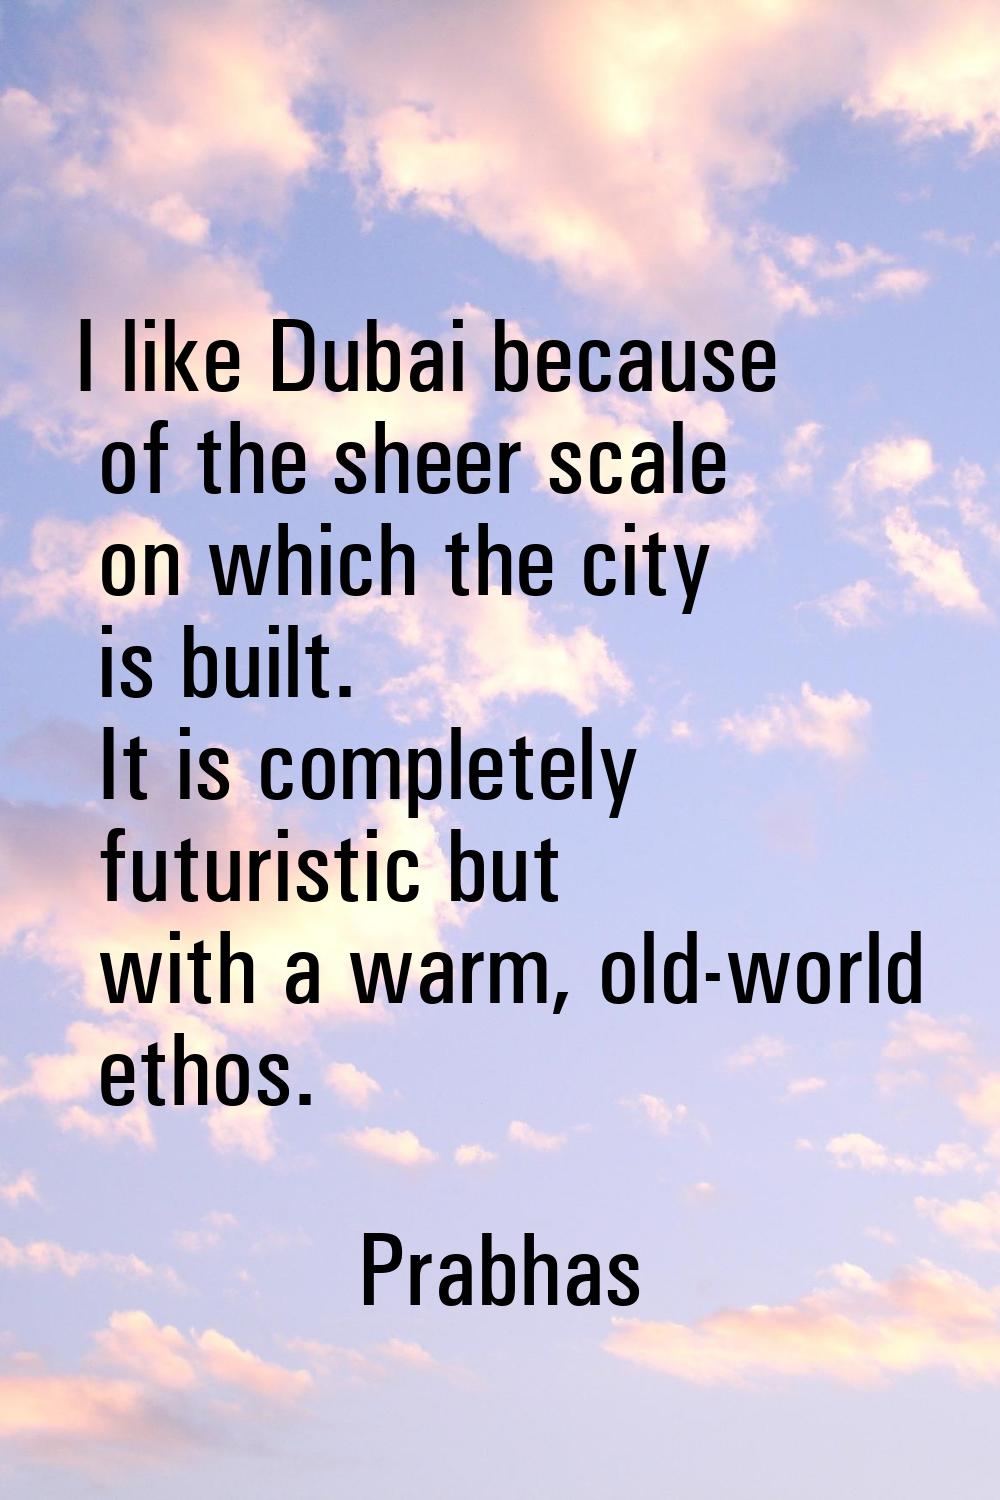 I like Dubai because of the sheer scale on which the city is built. It is completely futuristic but